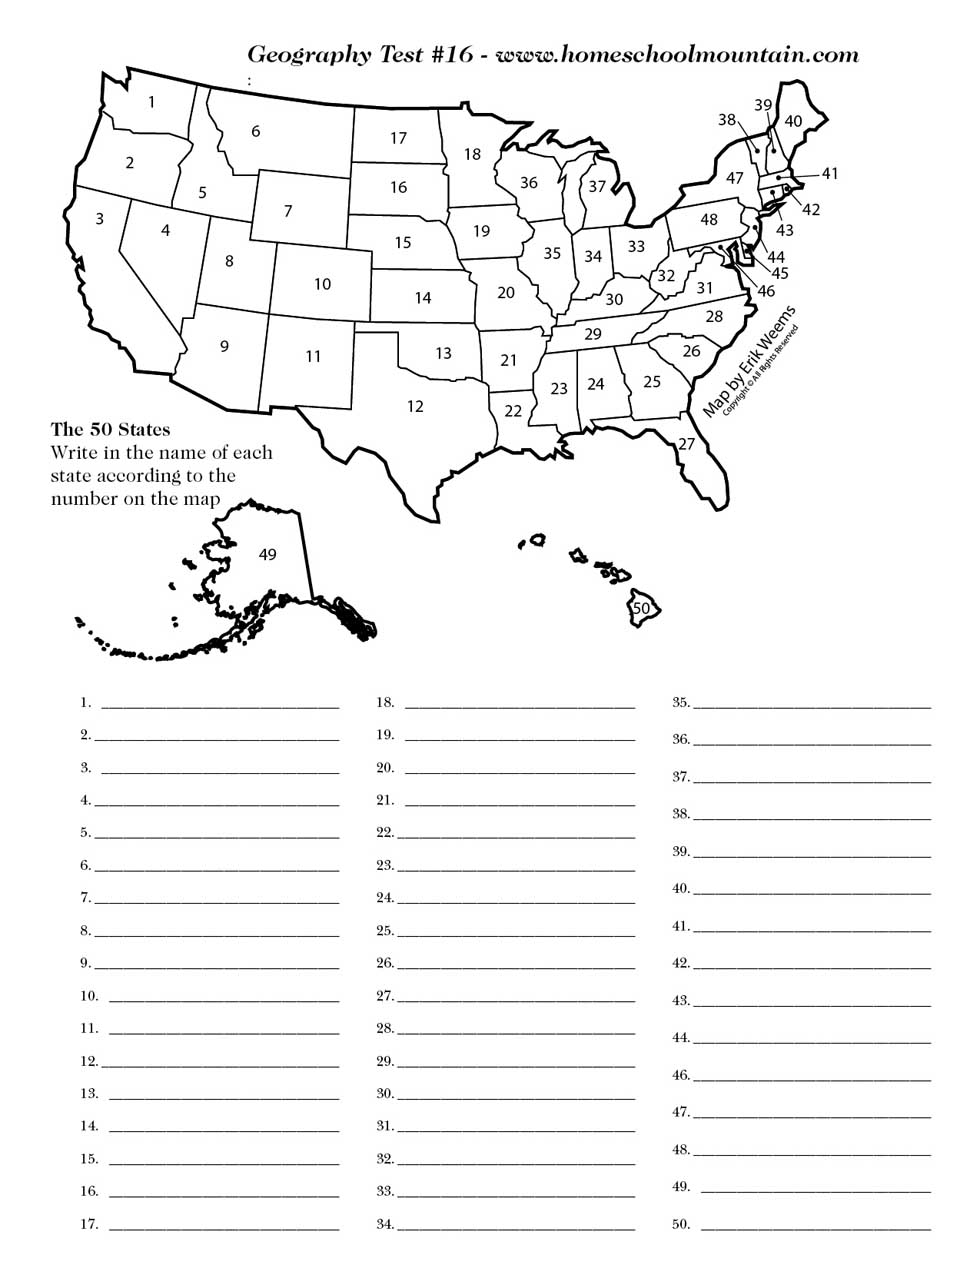 geography-test-16-the-50-states-home-school-mountain